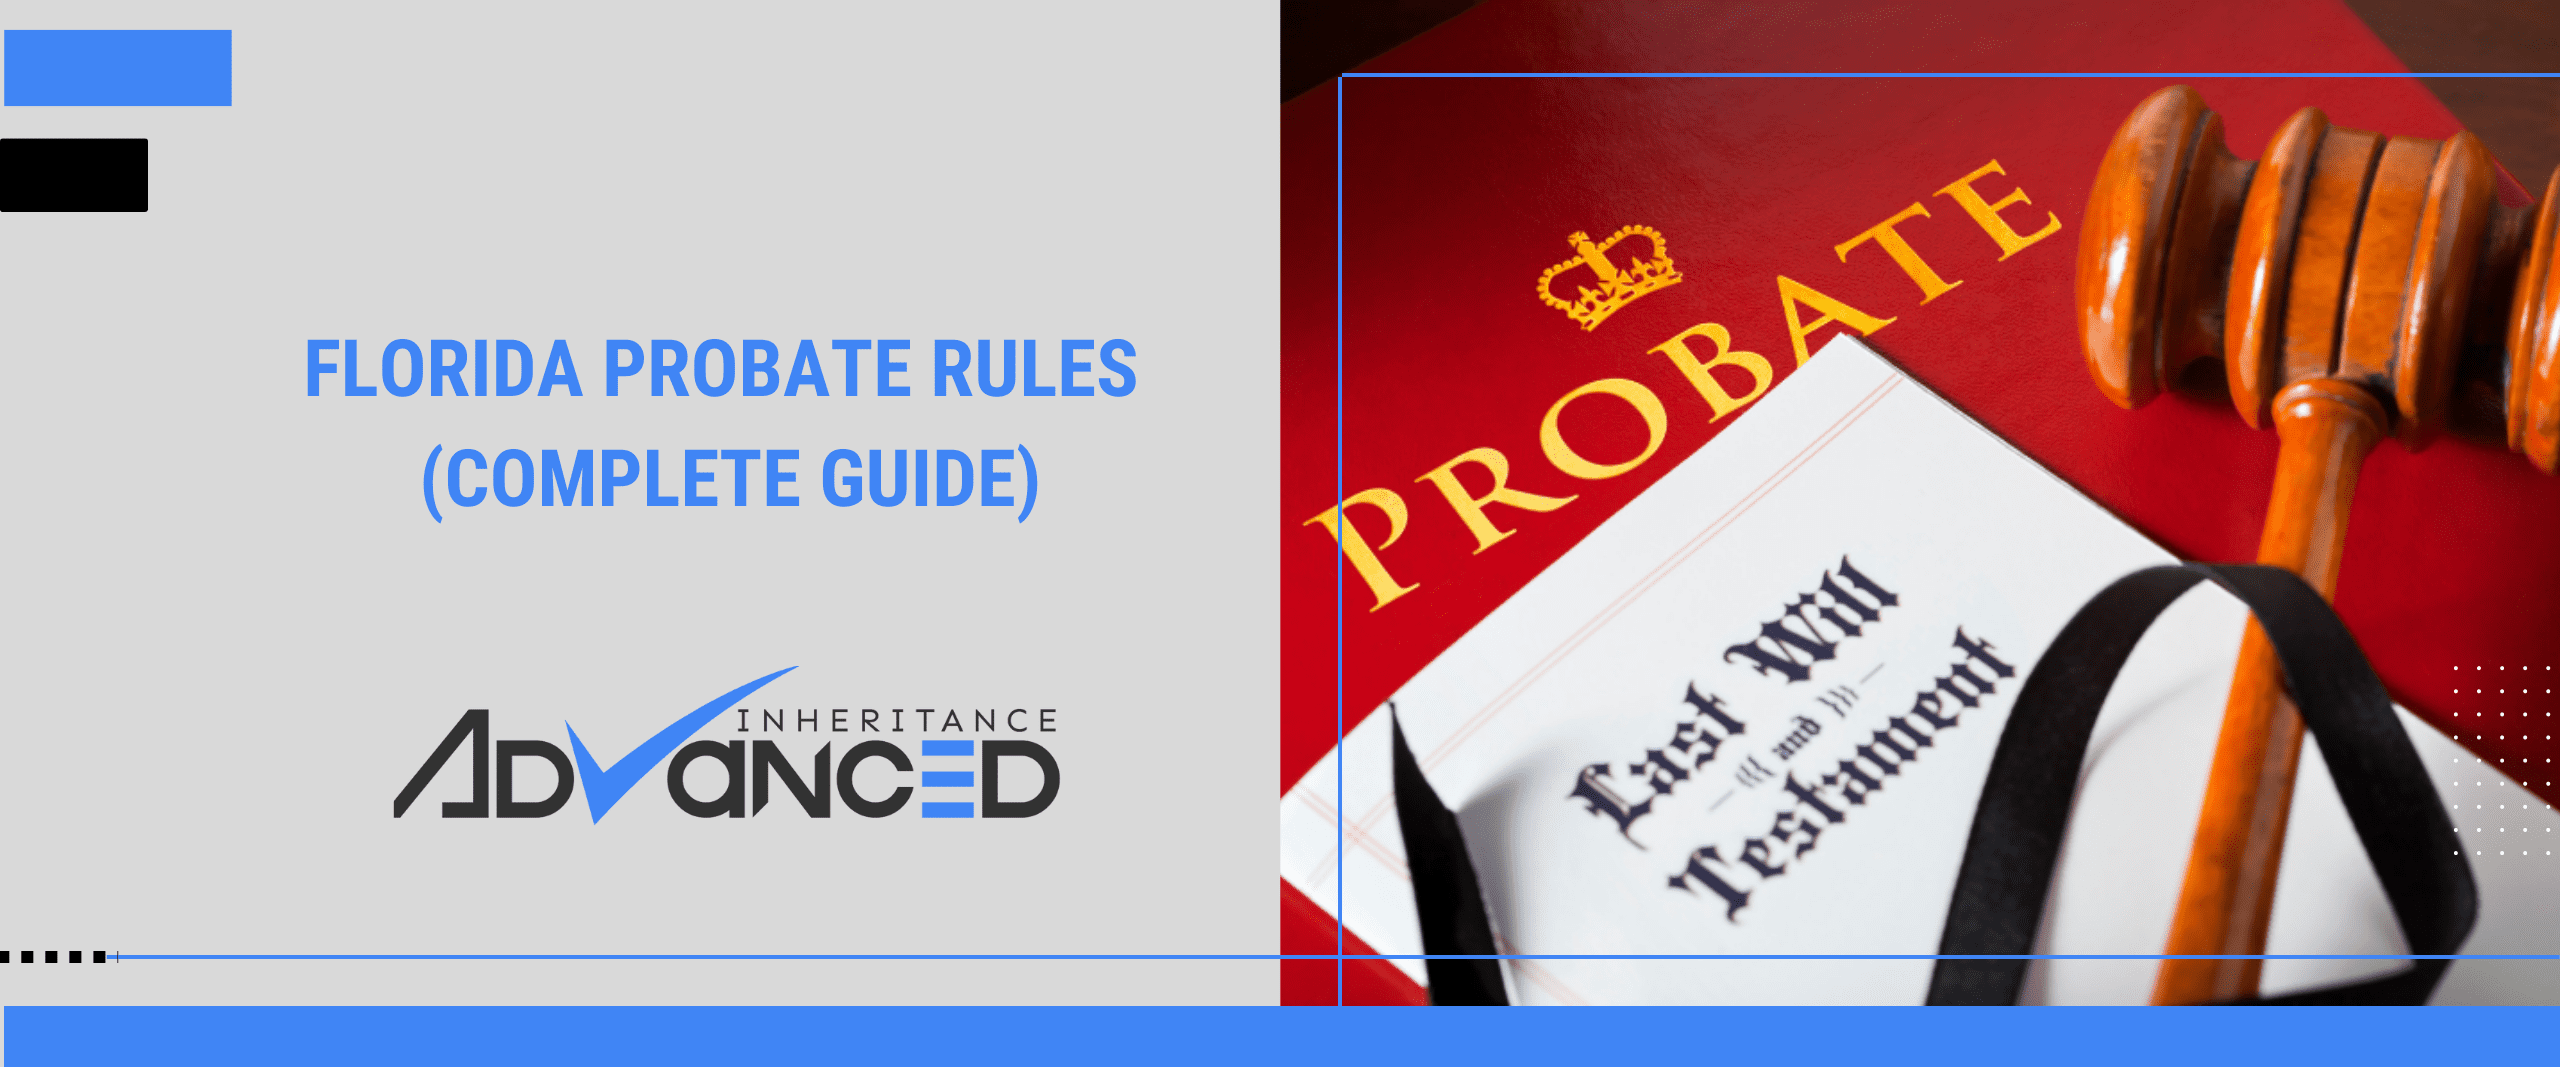 Florida Probate Rules (Complete Guide)